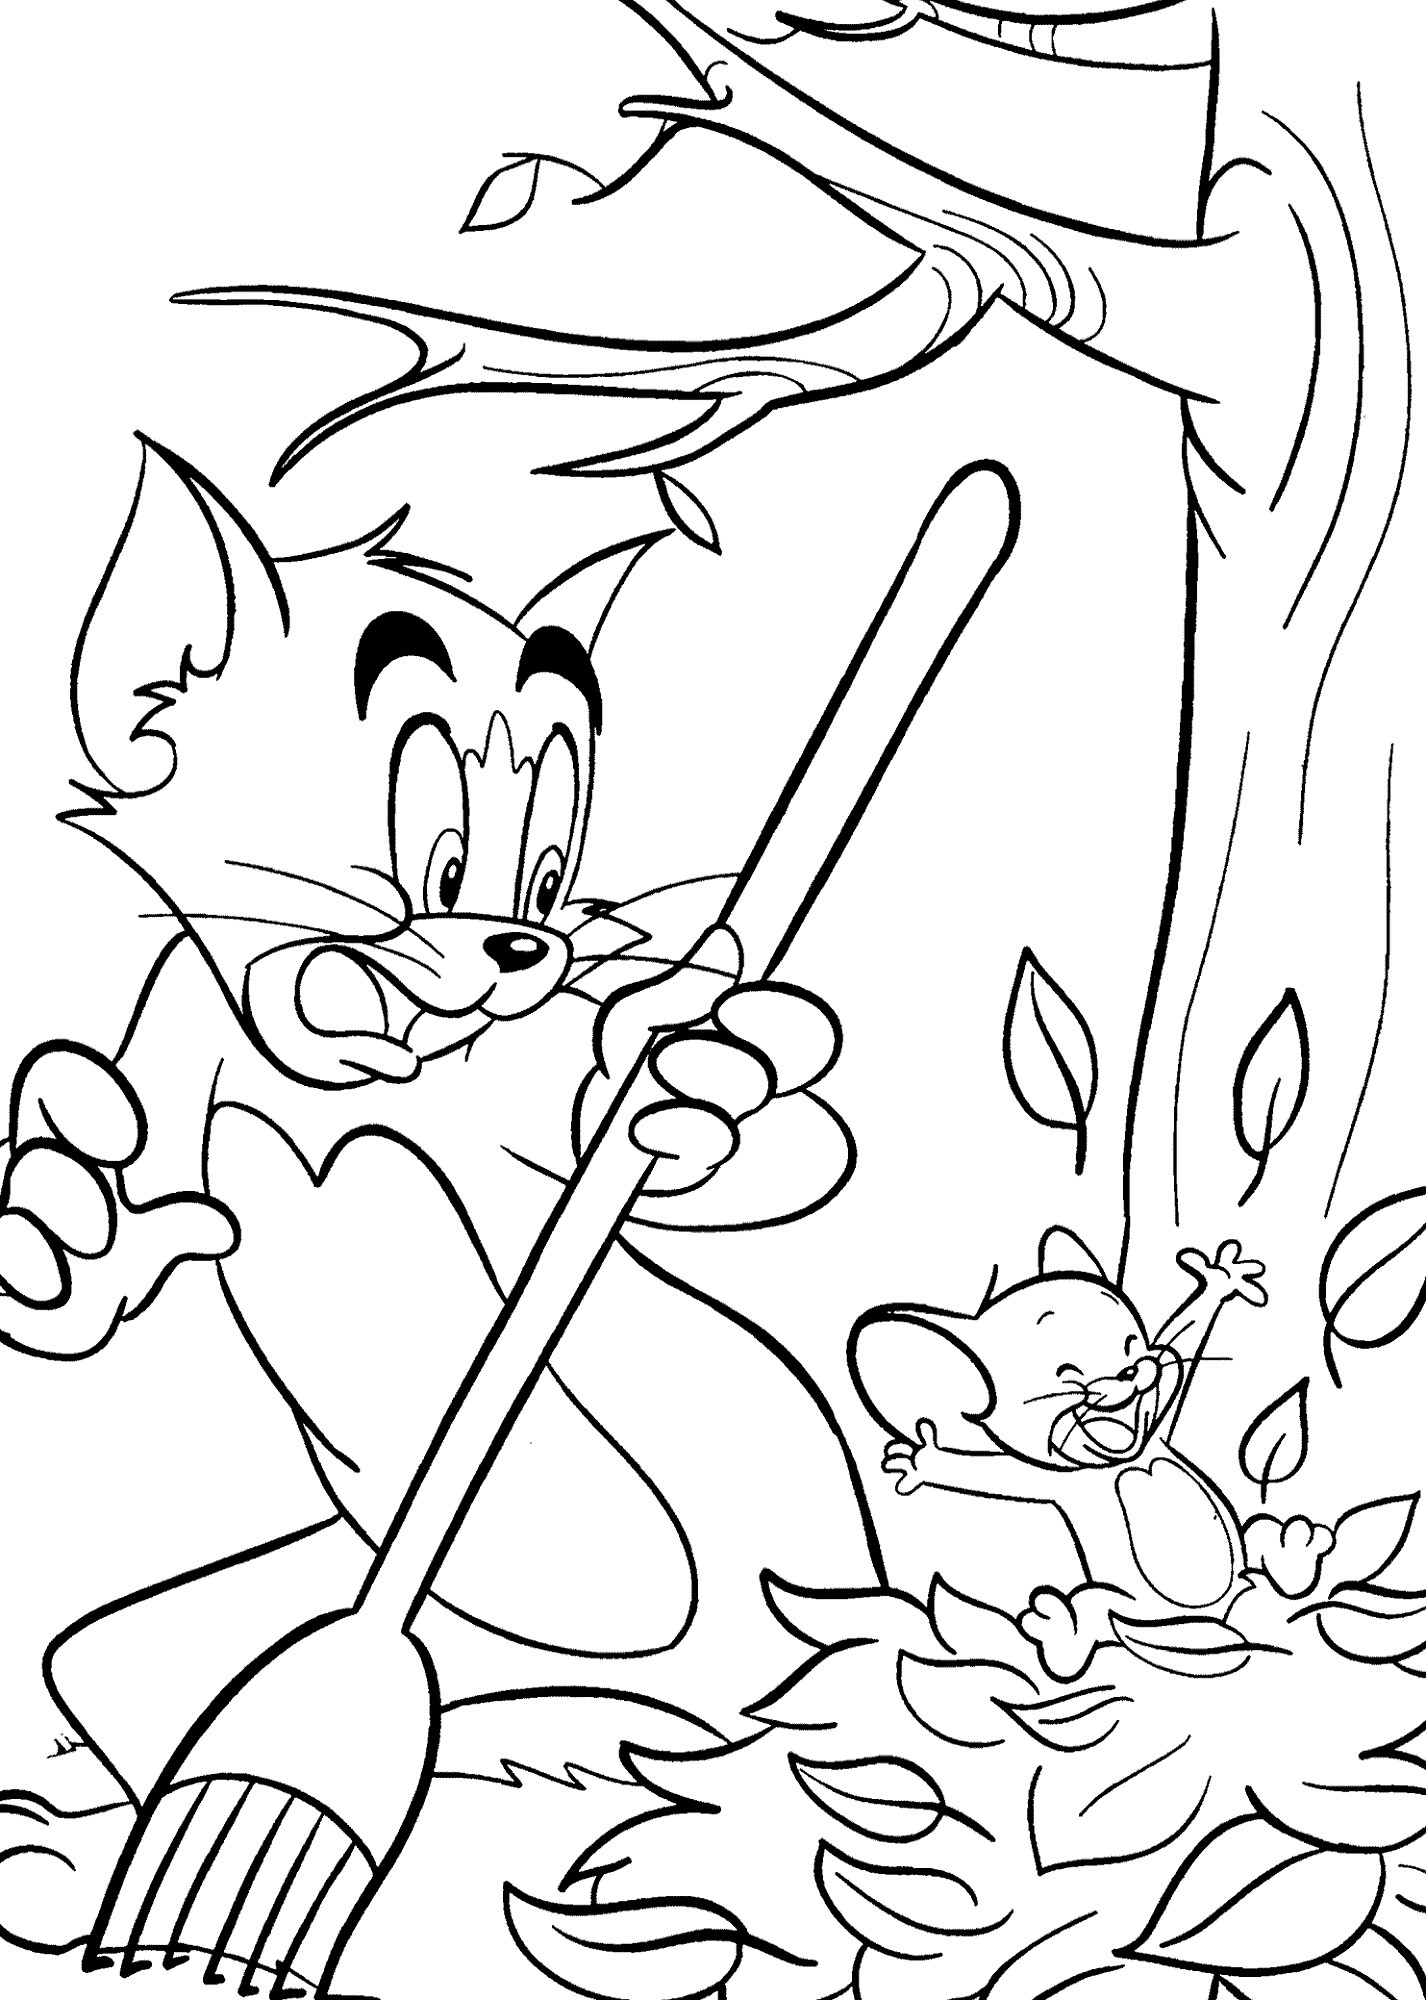 Kids Coloring Pages Fall
 Fall Coloring Pages for Kindergarten